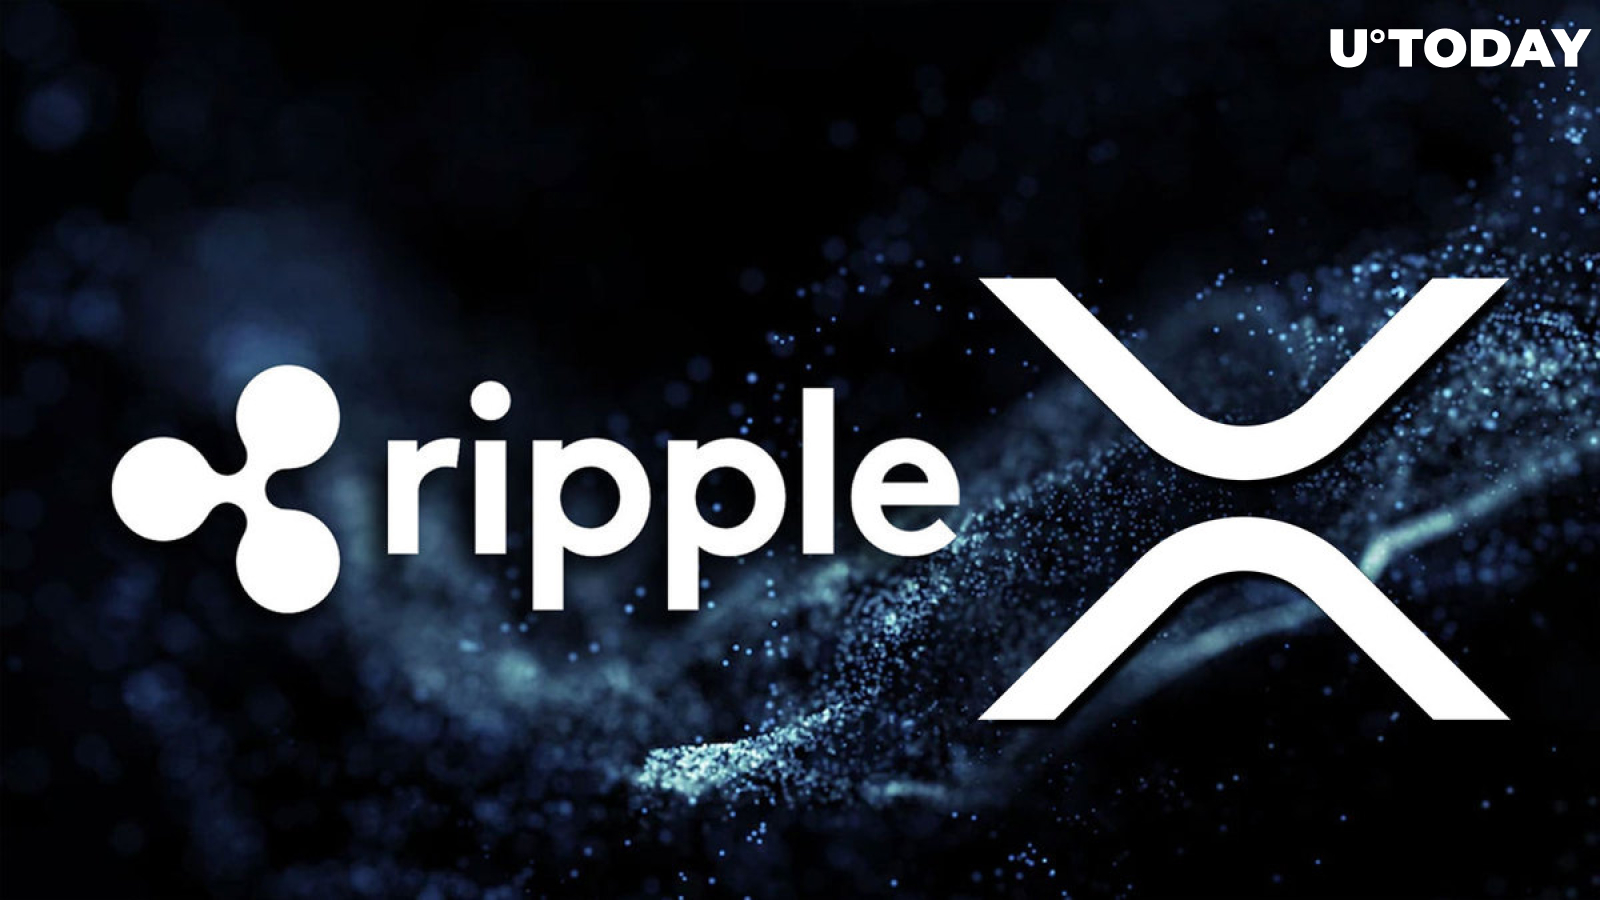 Ripple Moves 1 Billion XRP from Escrow, Here's How Much Remains Locked